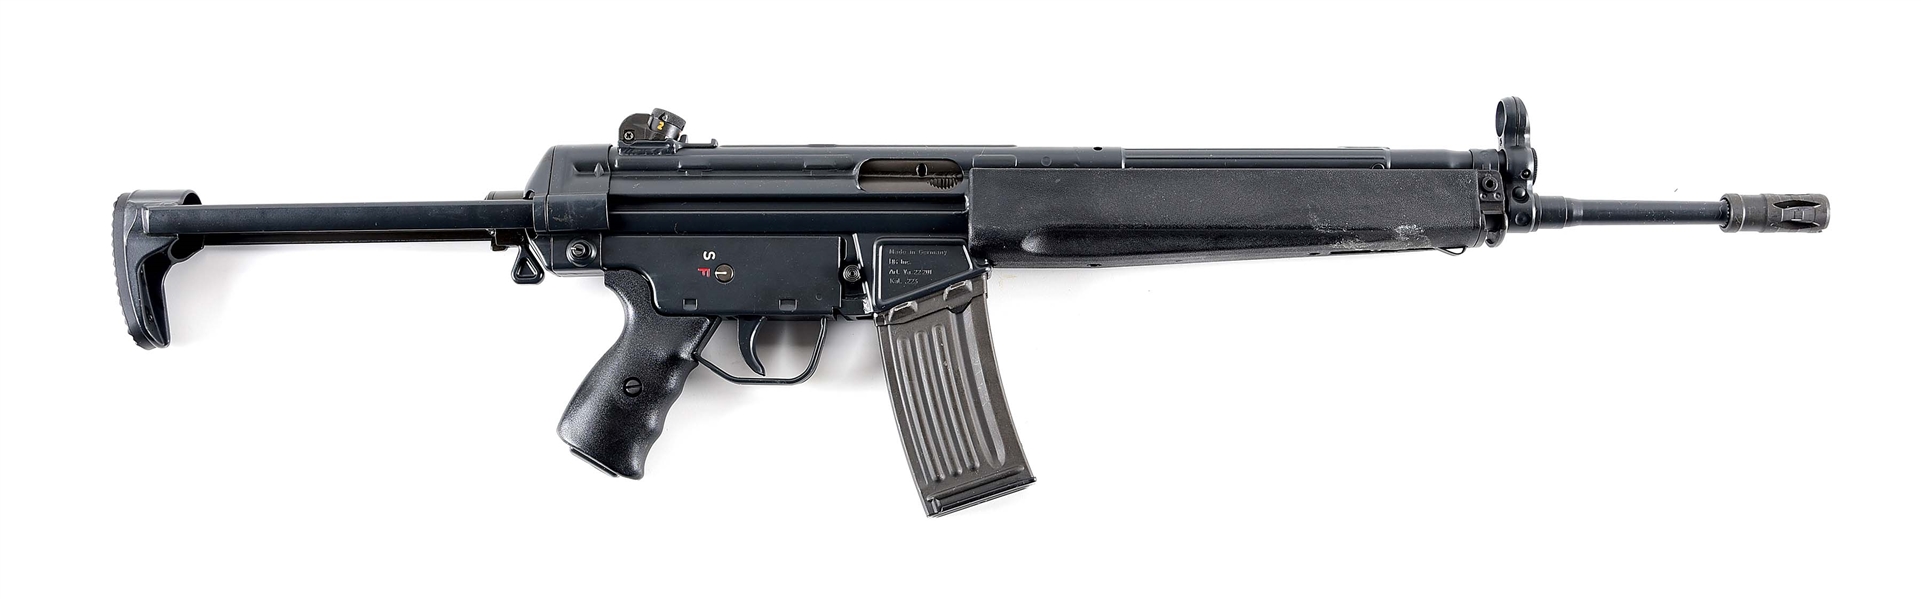 (M) PRE-BAN HECKLER & KOCH MODEL 93 SEMI-AUTOMATIC RIFLE WITH BOX & ACCESSORIES.